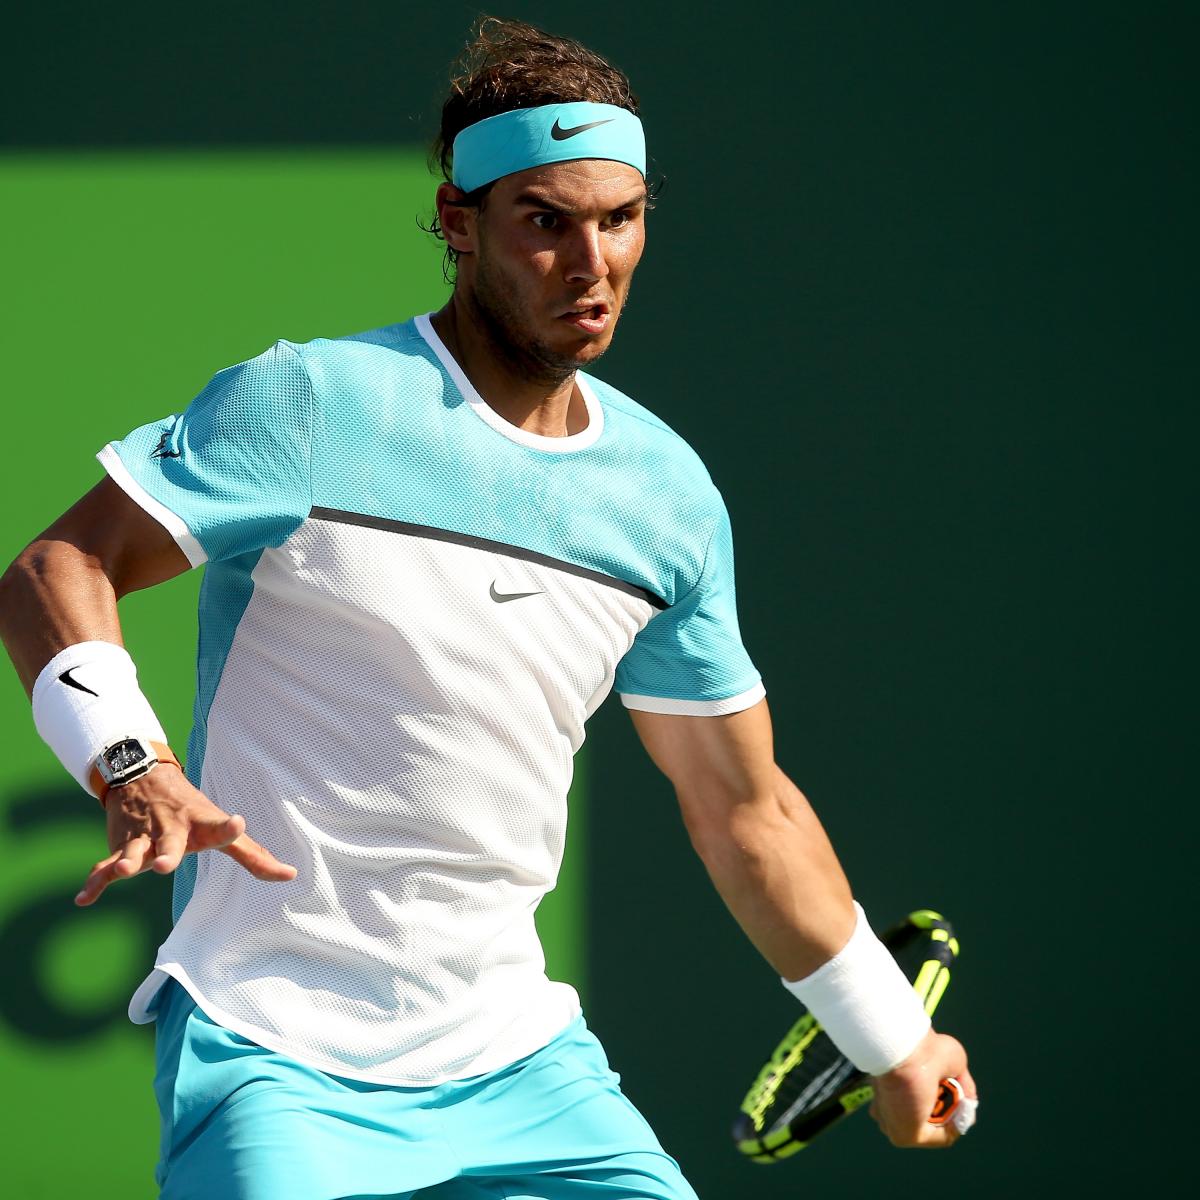 Miami Open Masters 2016 Results: Scores, Bracket and Schedule After ...